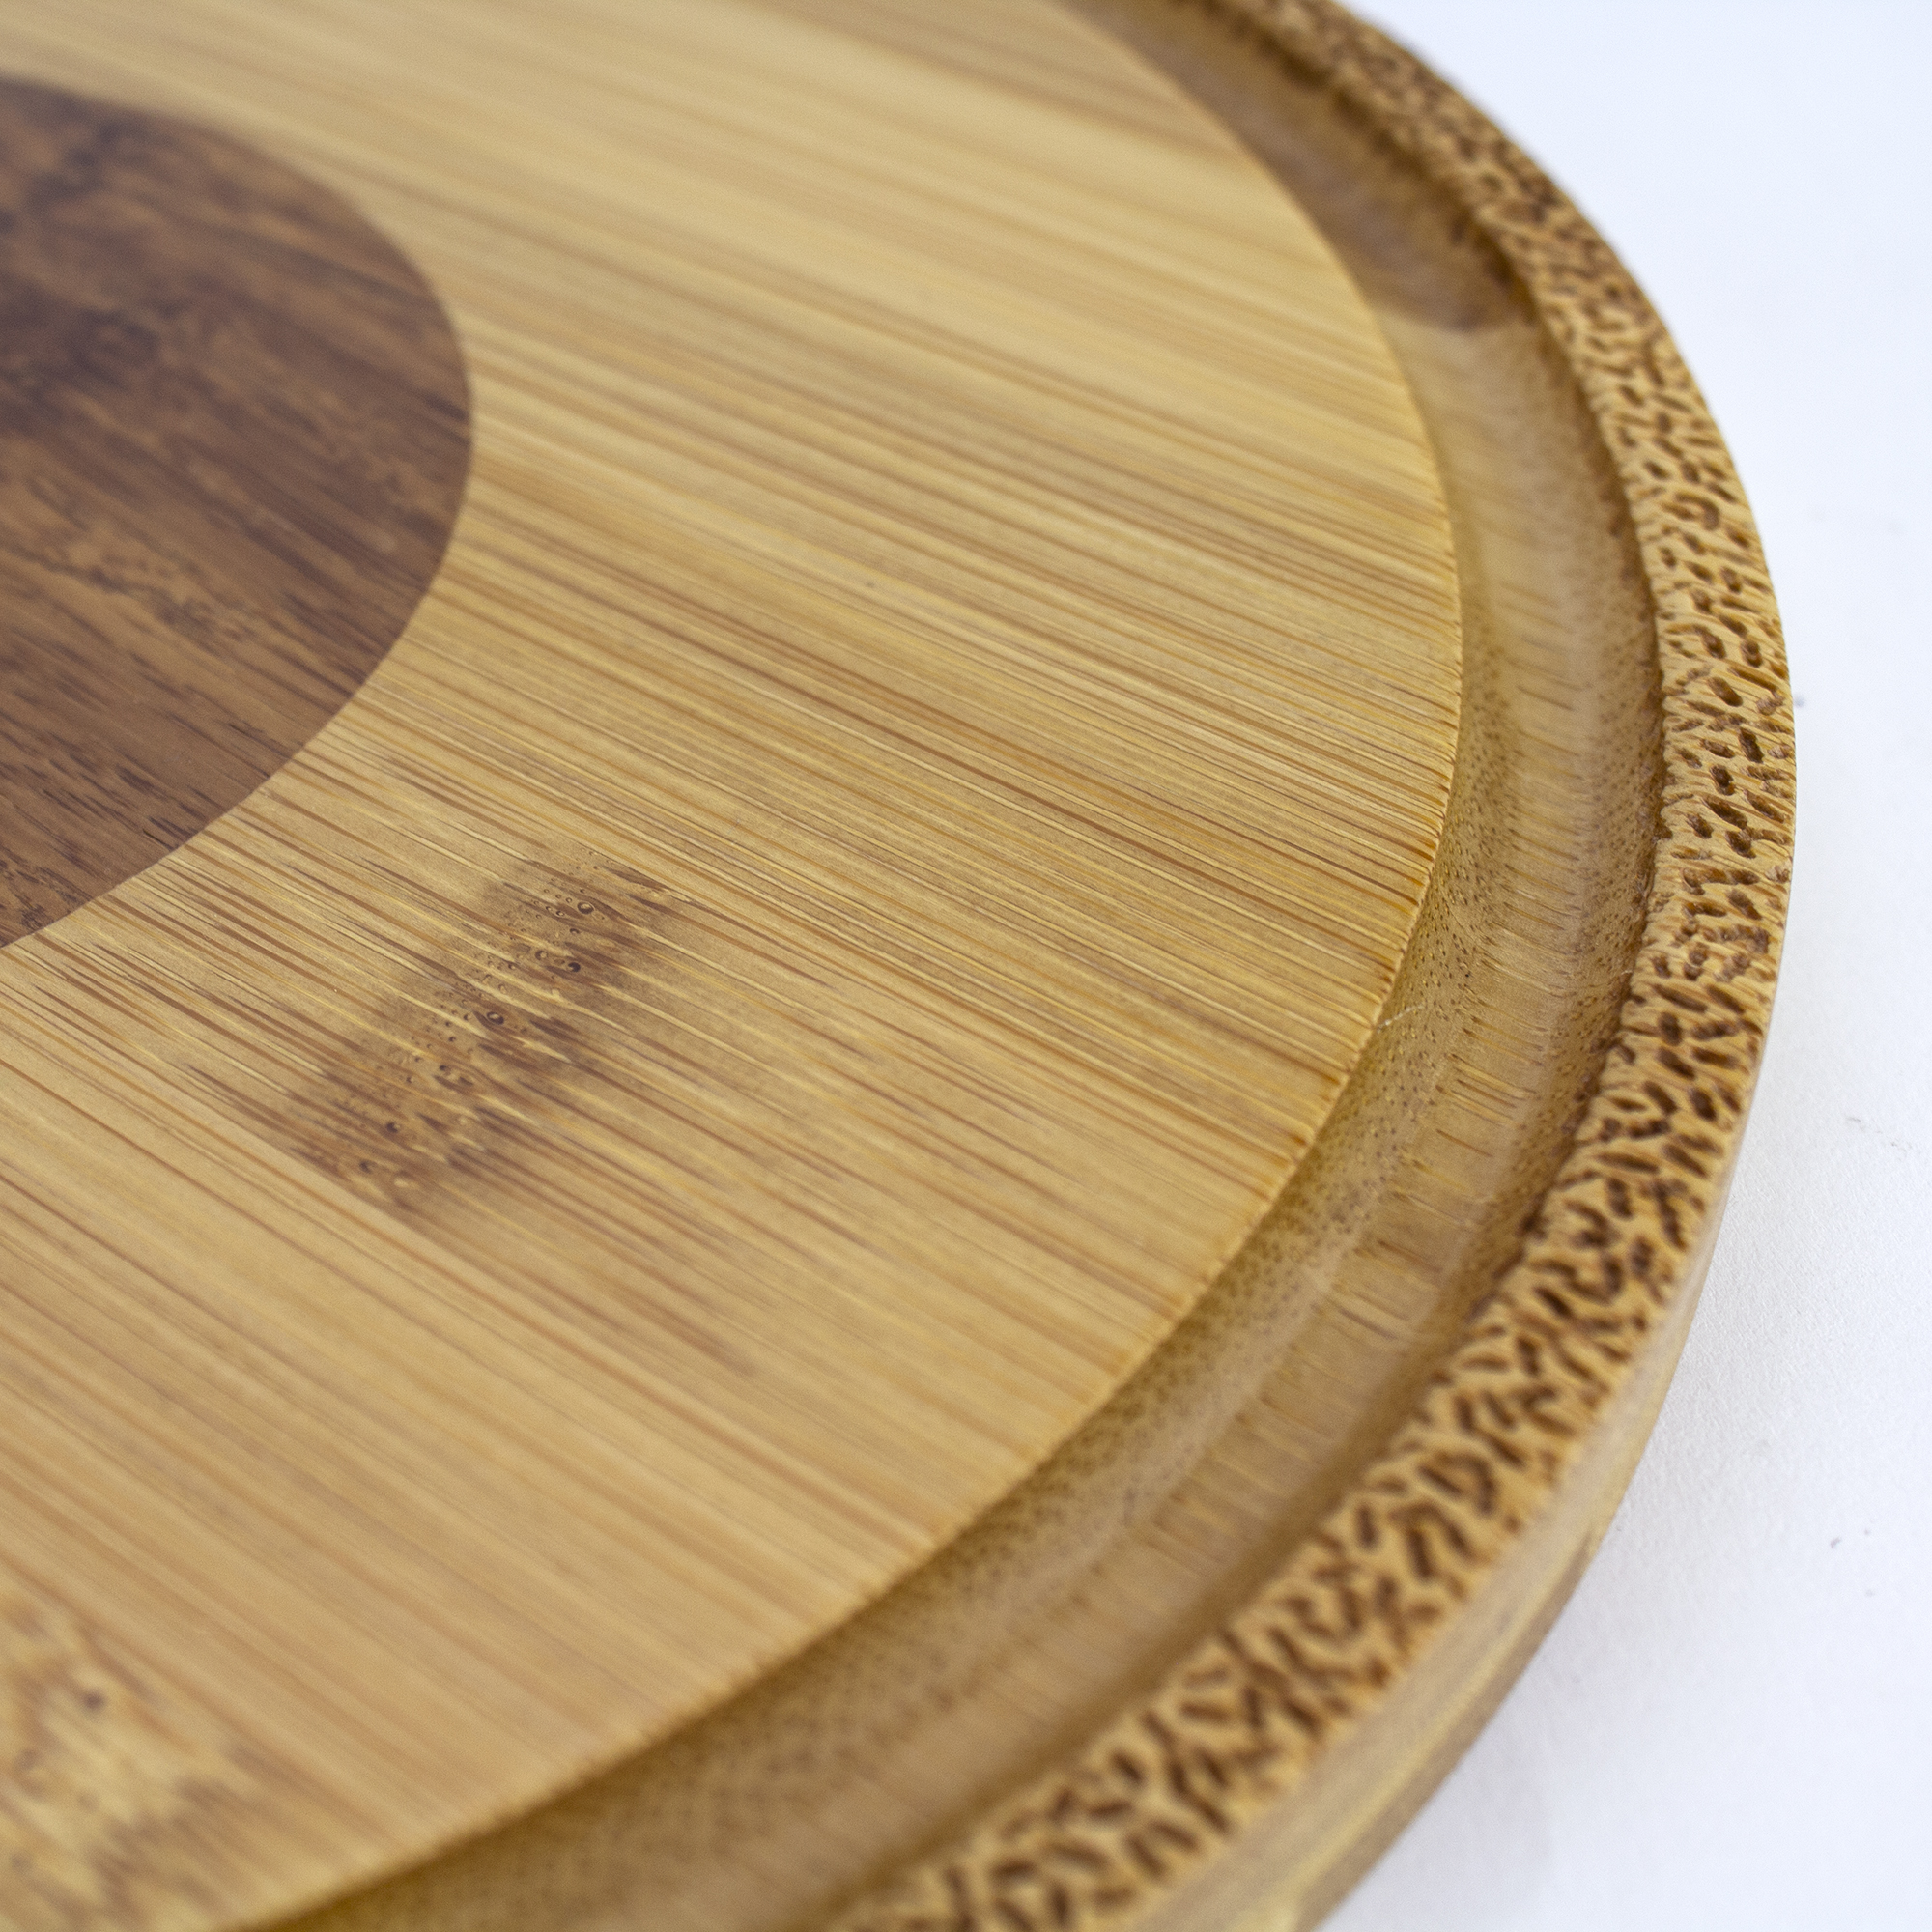 Totally Bamboo Avocado Obsession Eco-Friendly Serving and Cutting Board, Medium - image 2 of 5